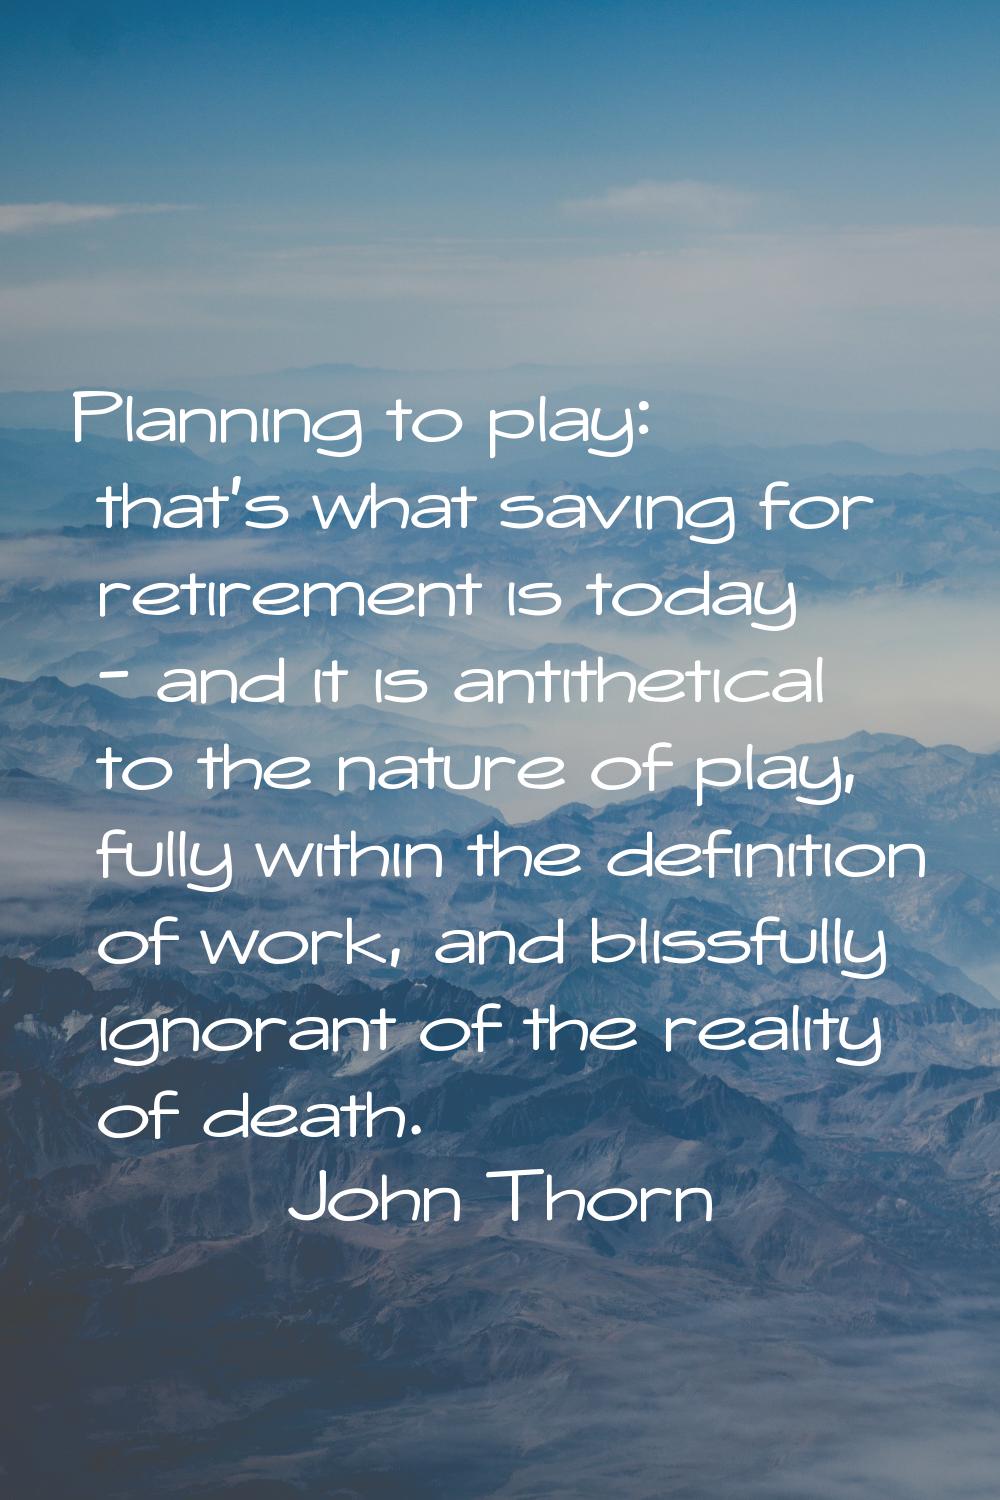 Planning to play: that's what saving for retirement is today - and it is antithetical to the nature